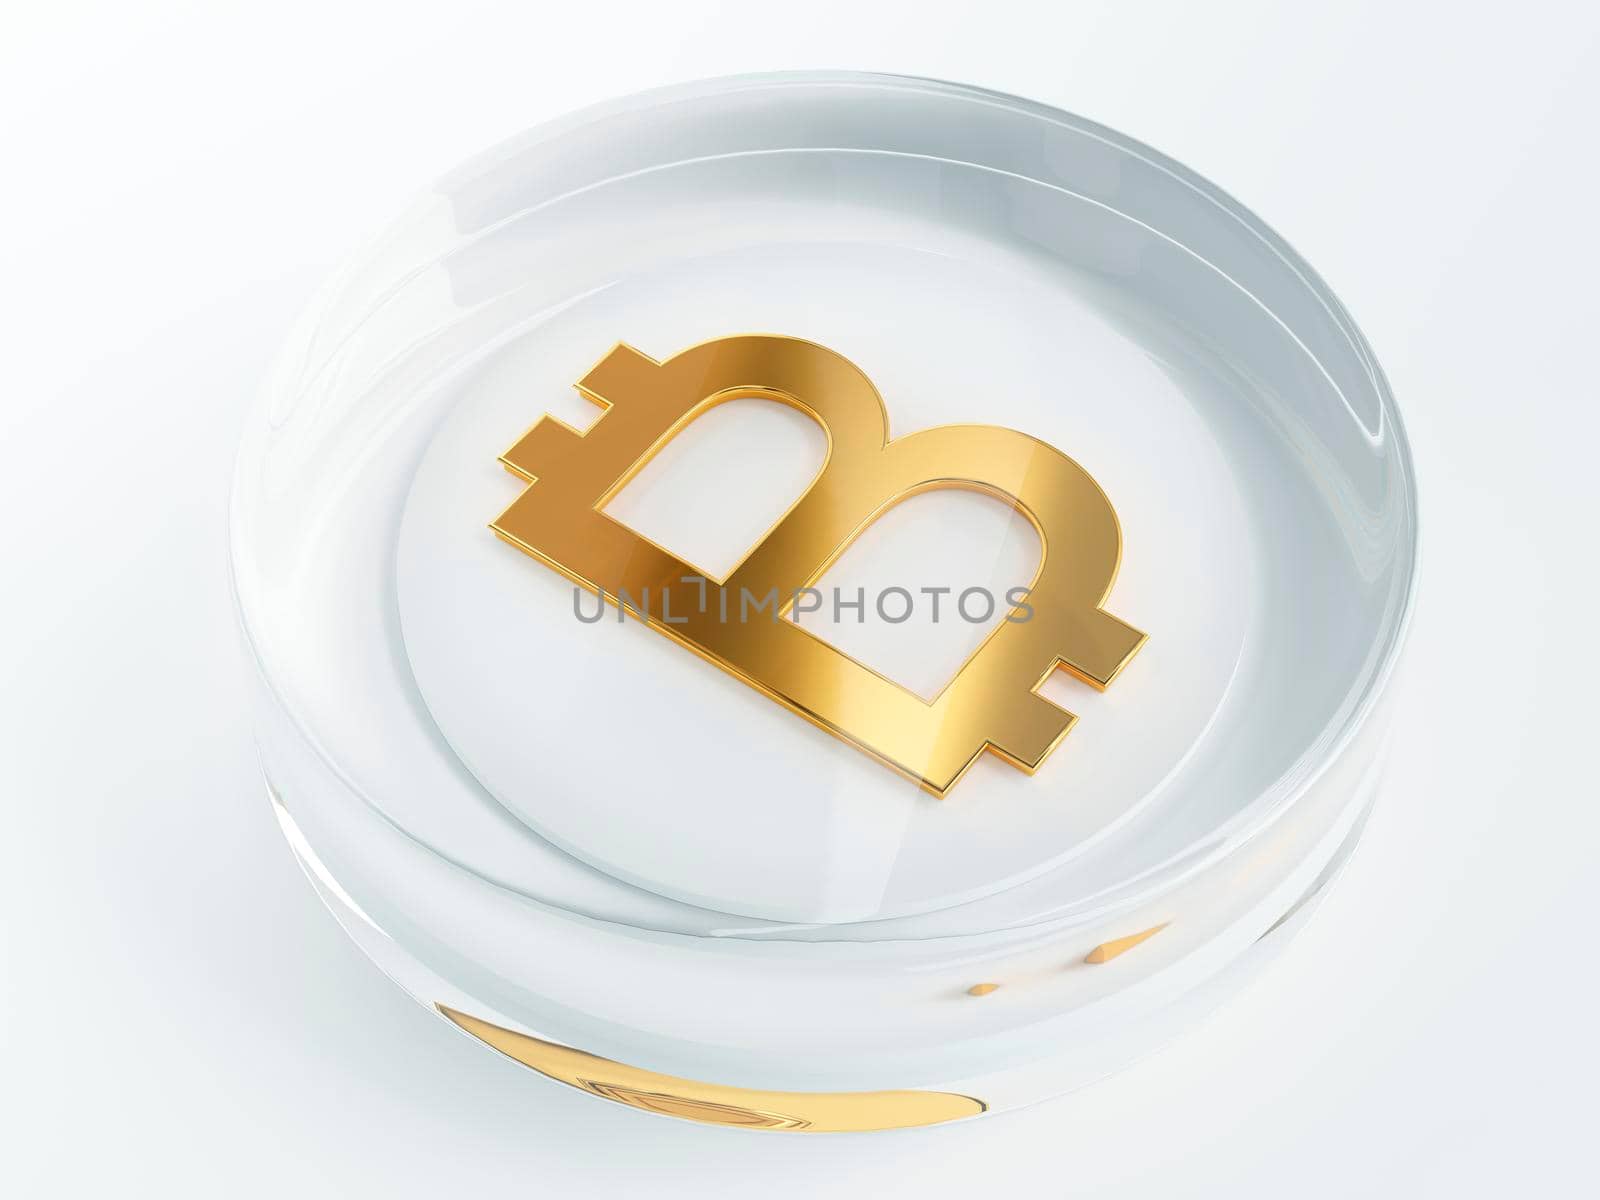 bitcoin cryptocurrency golden symbol covered with glass  by Arsgera